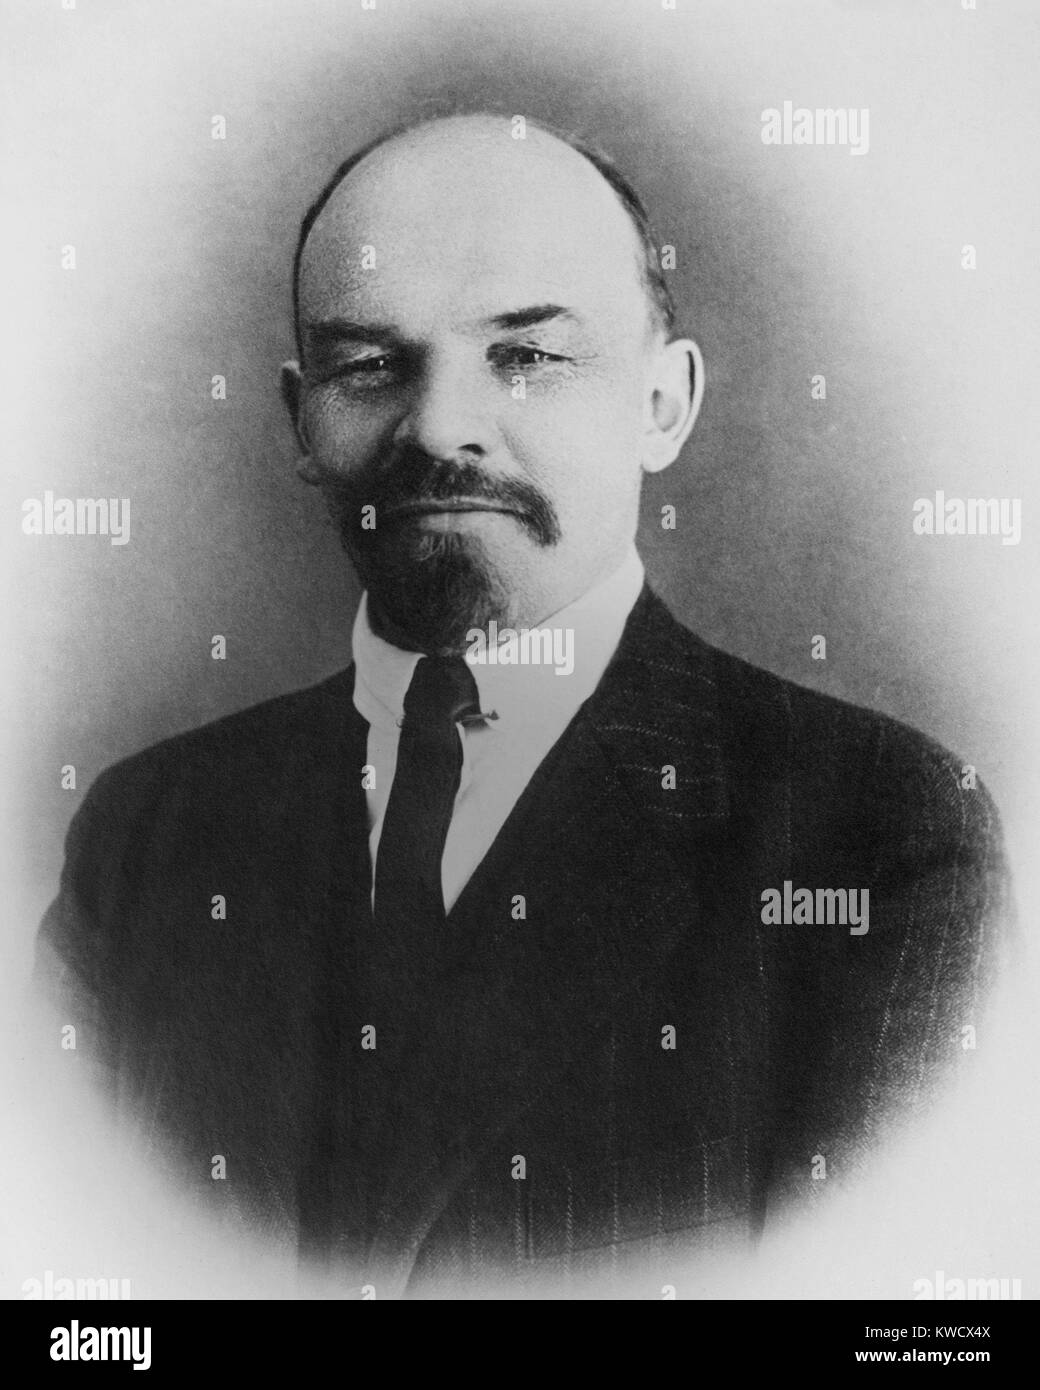 Vladimir Ilyich Ulyanov Lenin, 1916 while in political exile in Switzerland. Possibly taken at the Kienthal Conference (aka. Second Zimmerwald Conference) an international conference of socialists who opposed the First World War (BSLOC_2017_2_17) Stock Photo